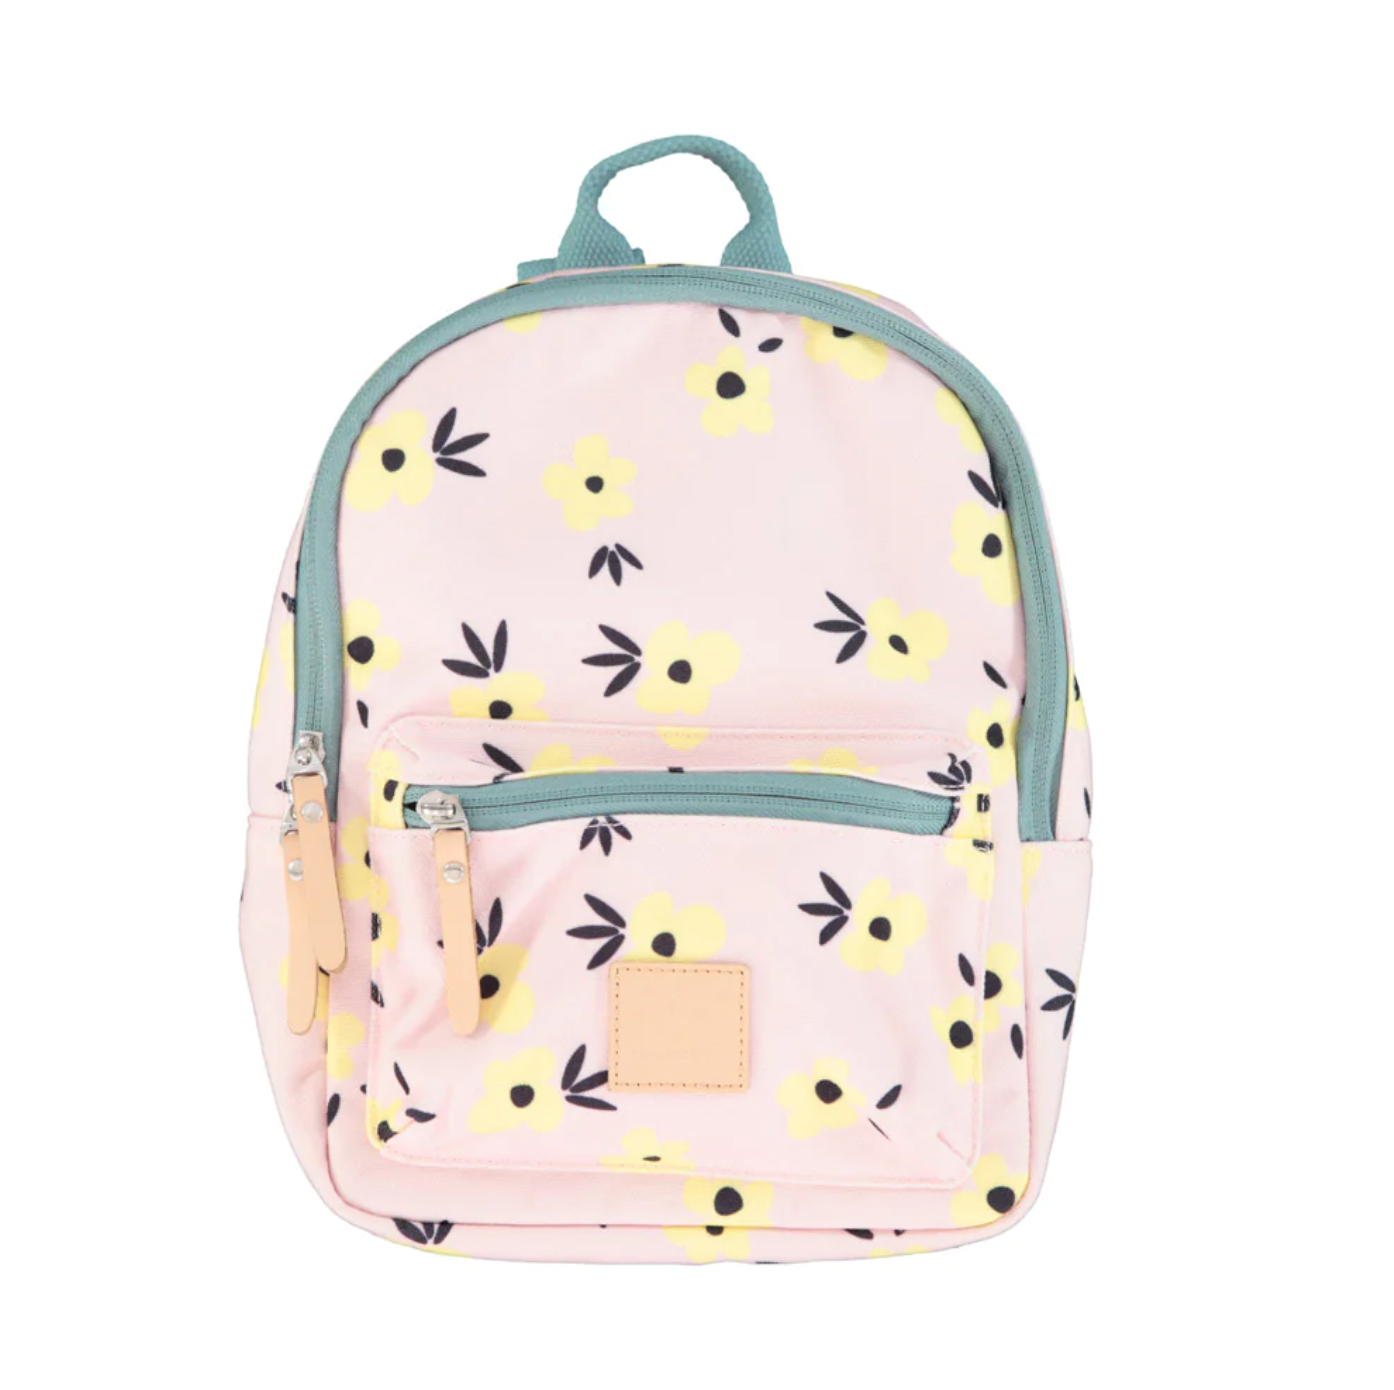 Small backpack - Pale pink and yellow flowers